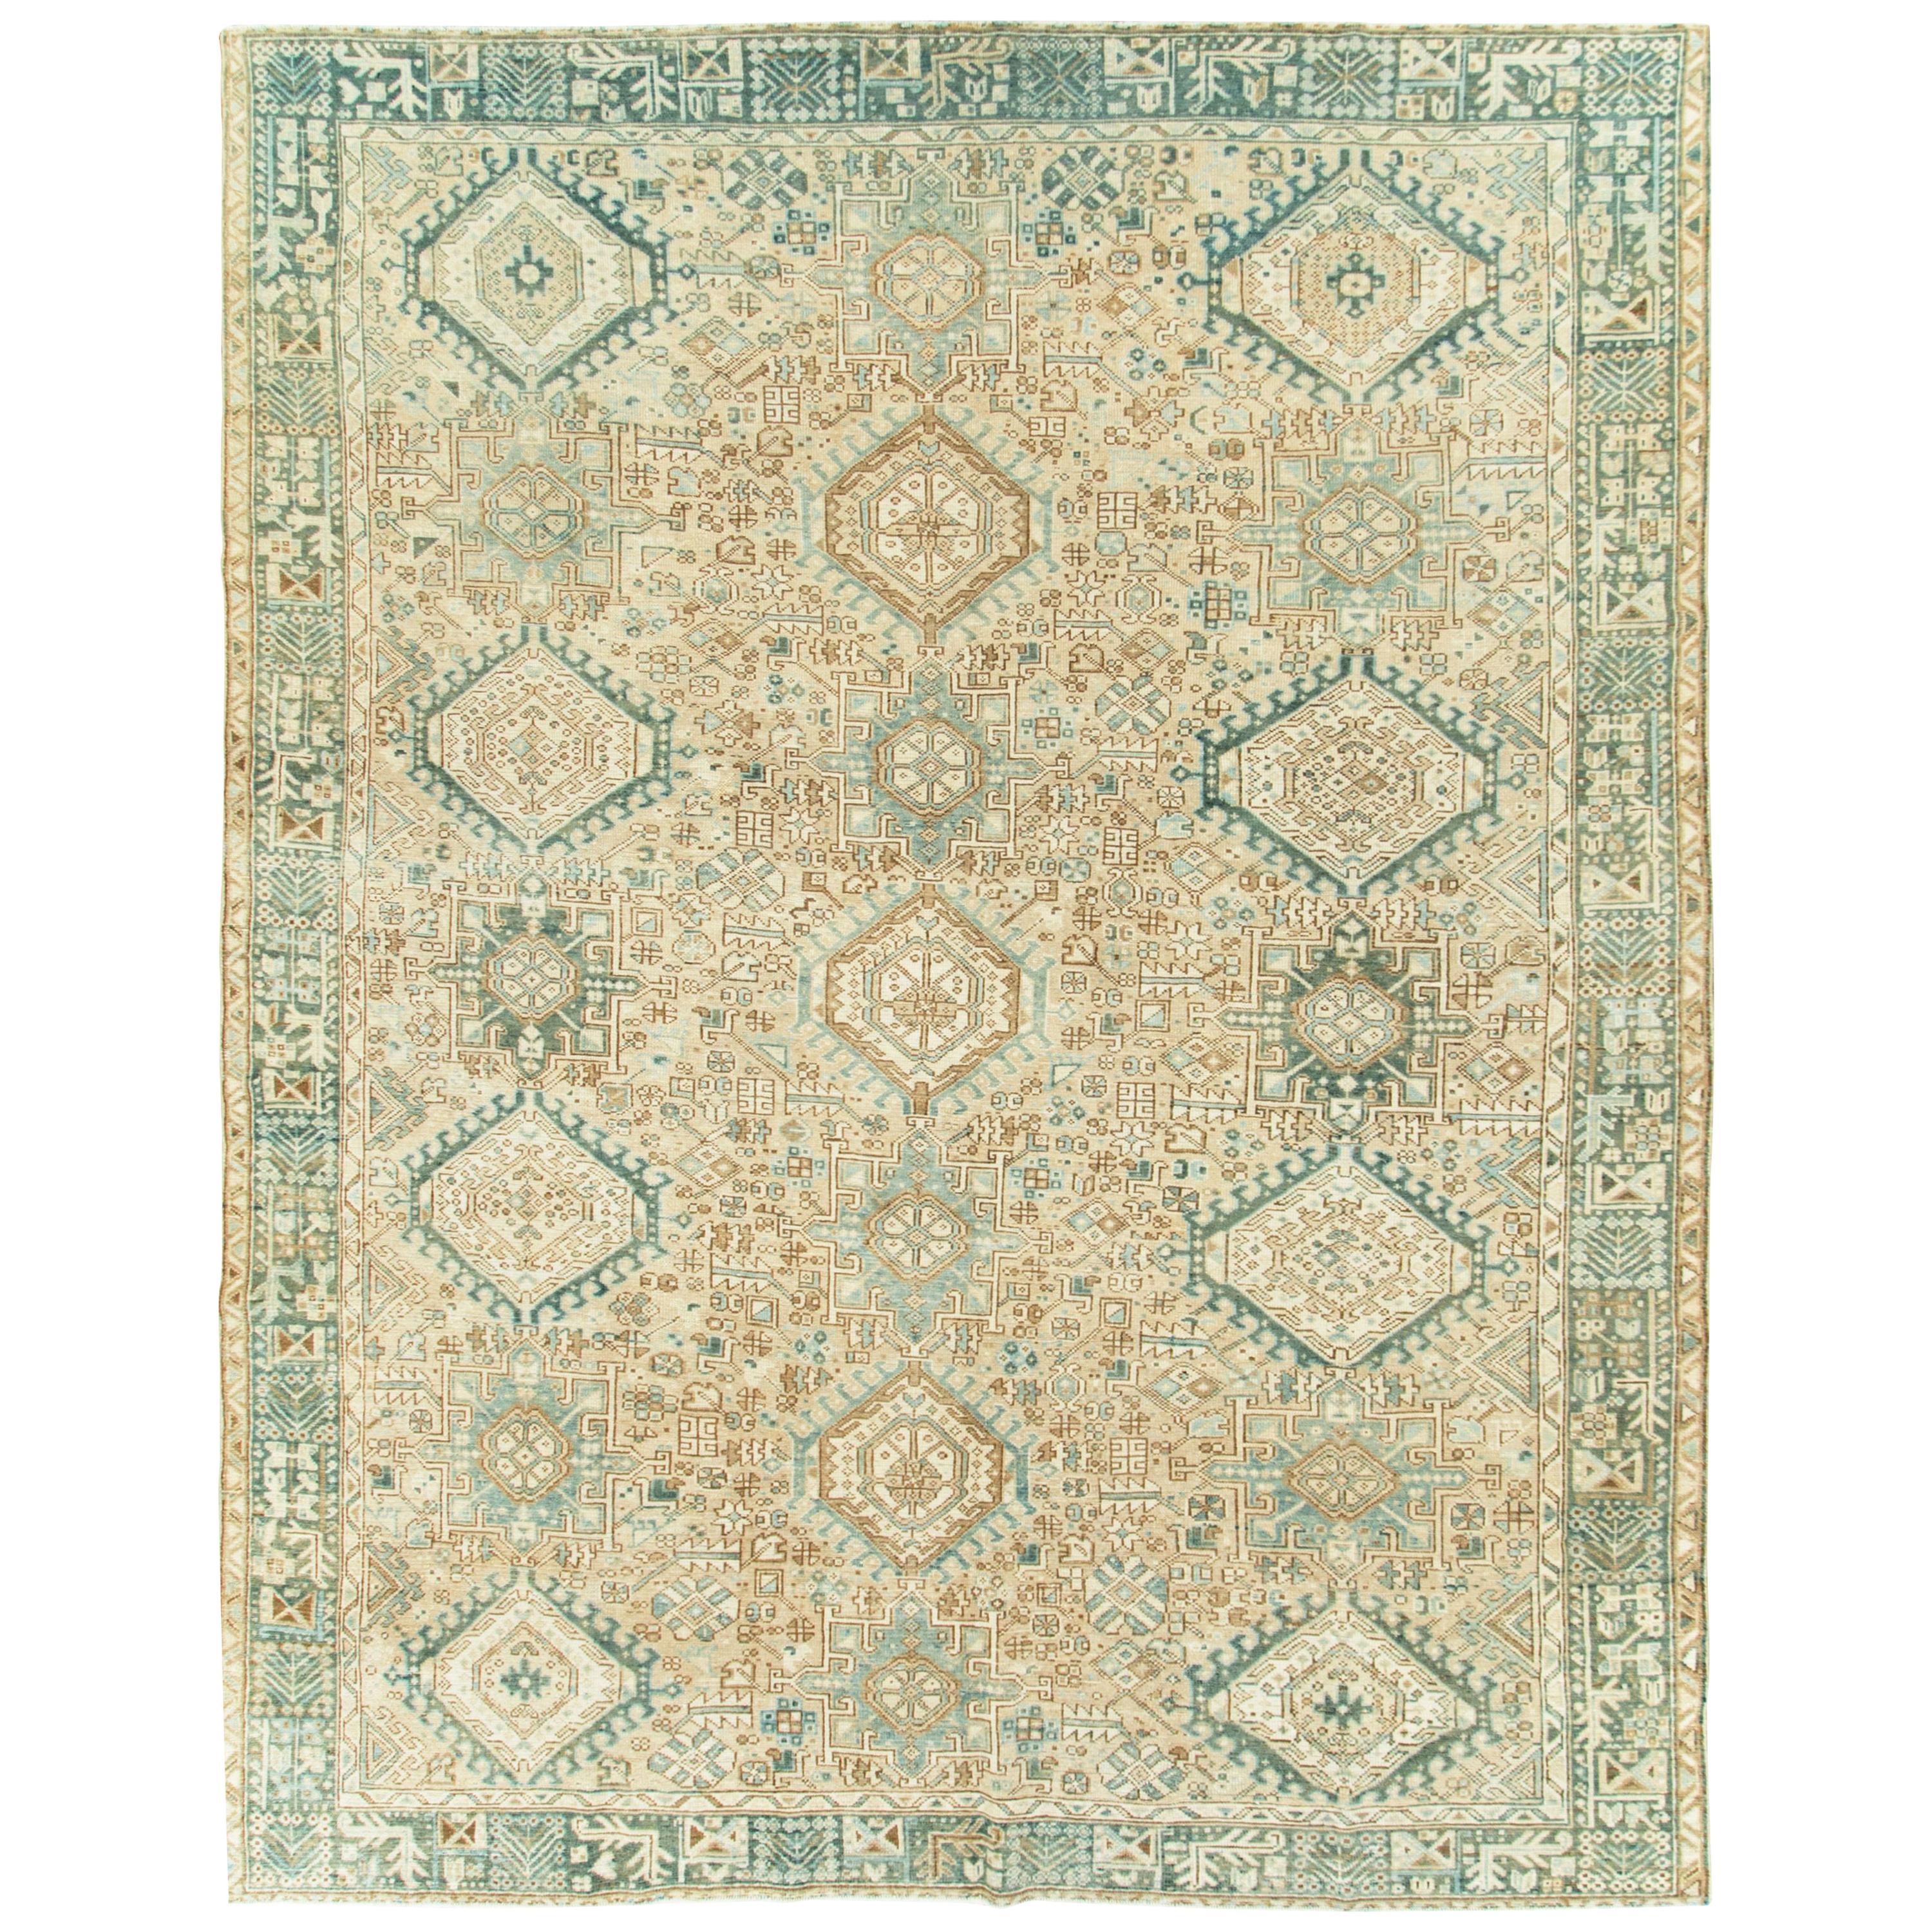 Mid-Century Persian Room Size Carpet With A Tribal Design In Teal and Sand Color